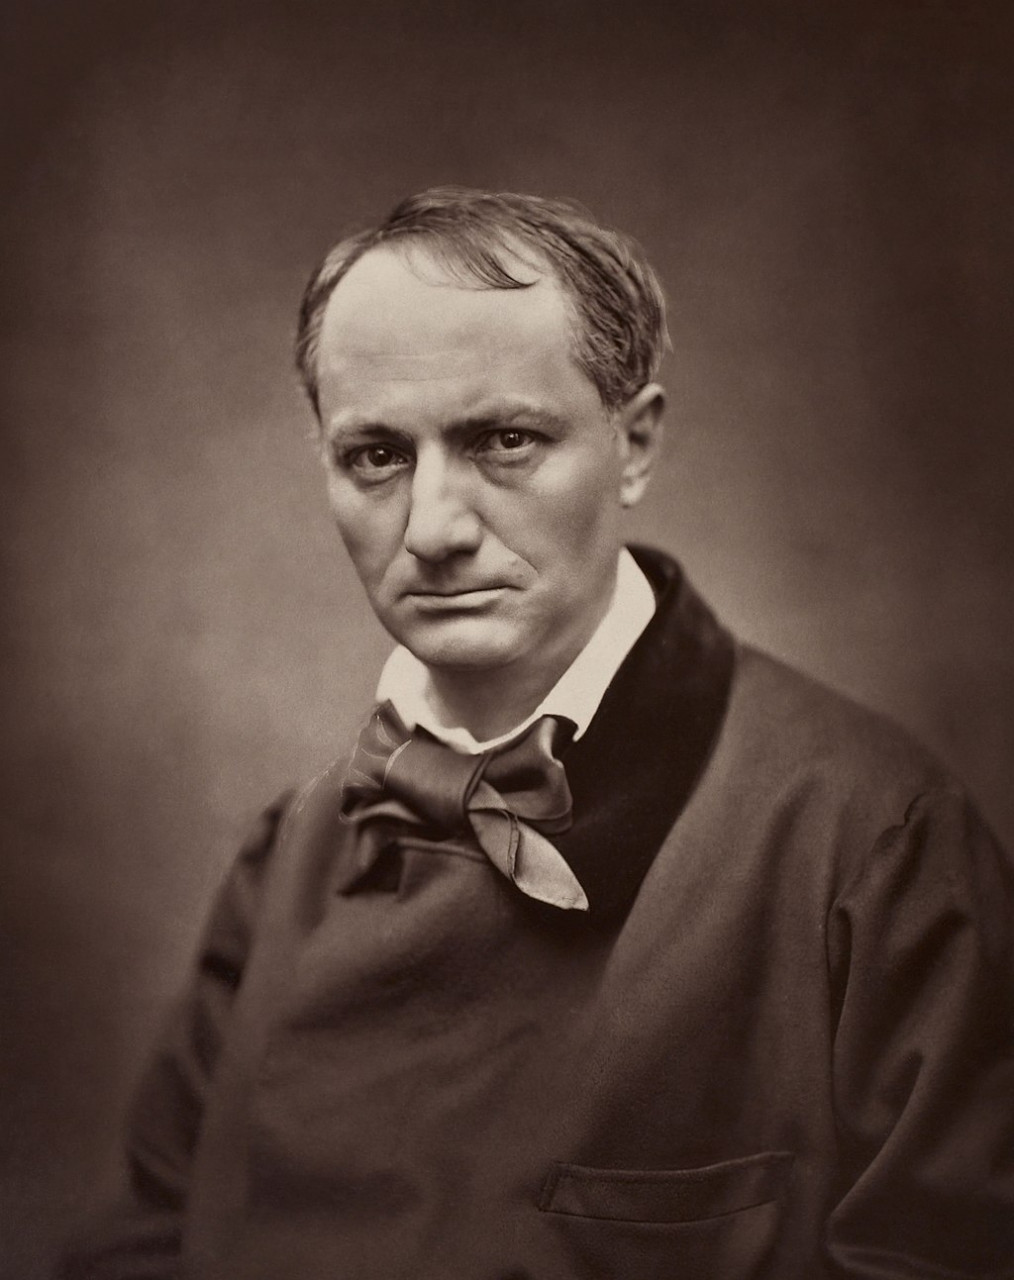 Portrait of Charles Baudelaire by Étienne Carjat circa 1862. – Wikimedia pic